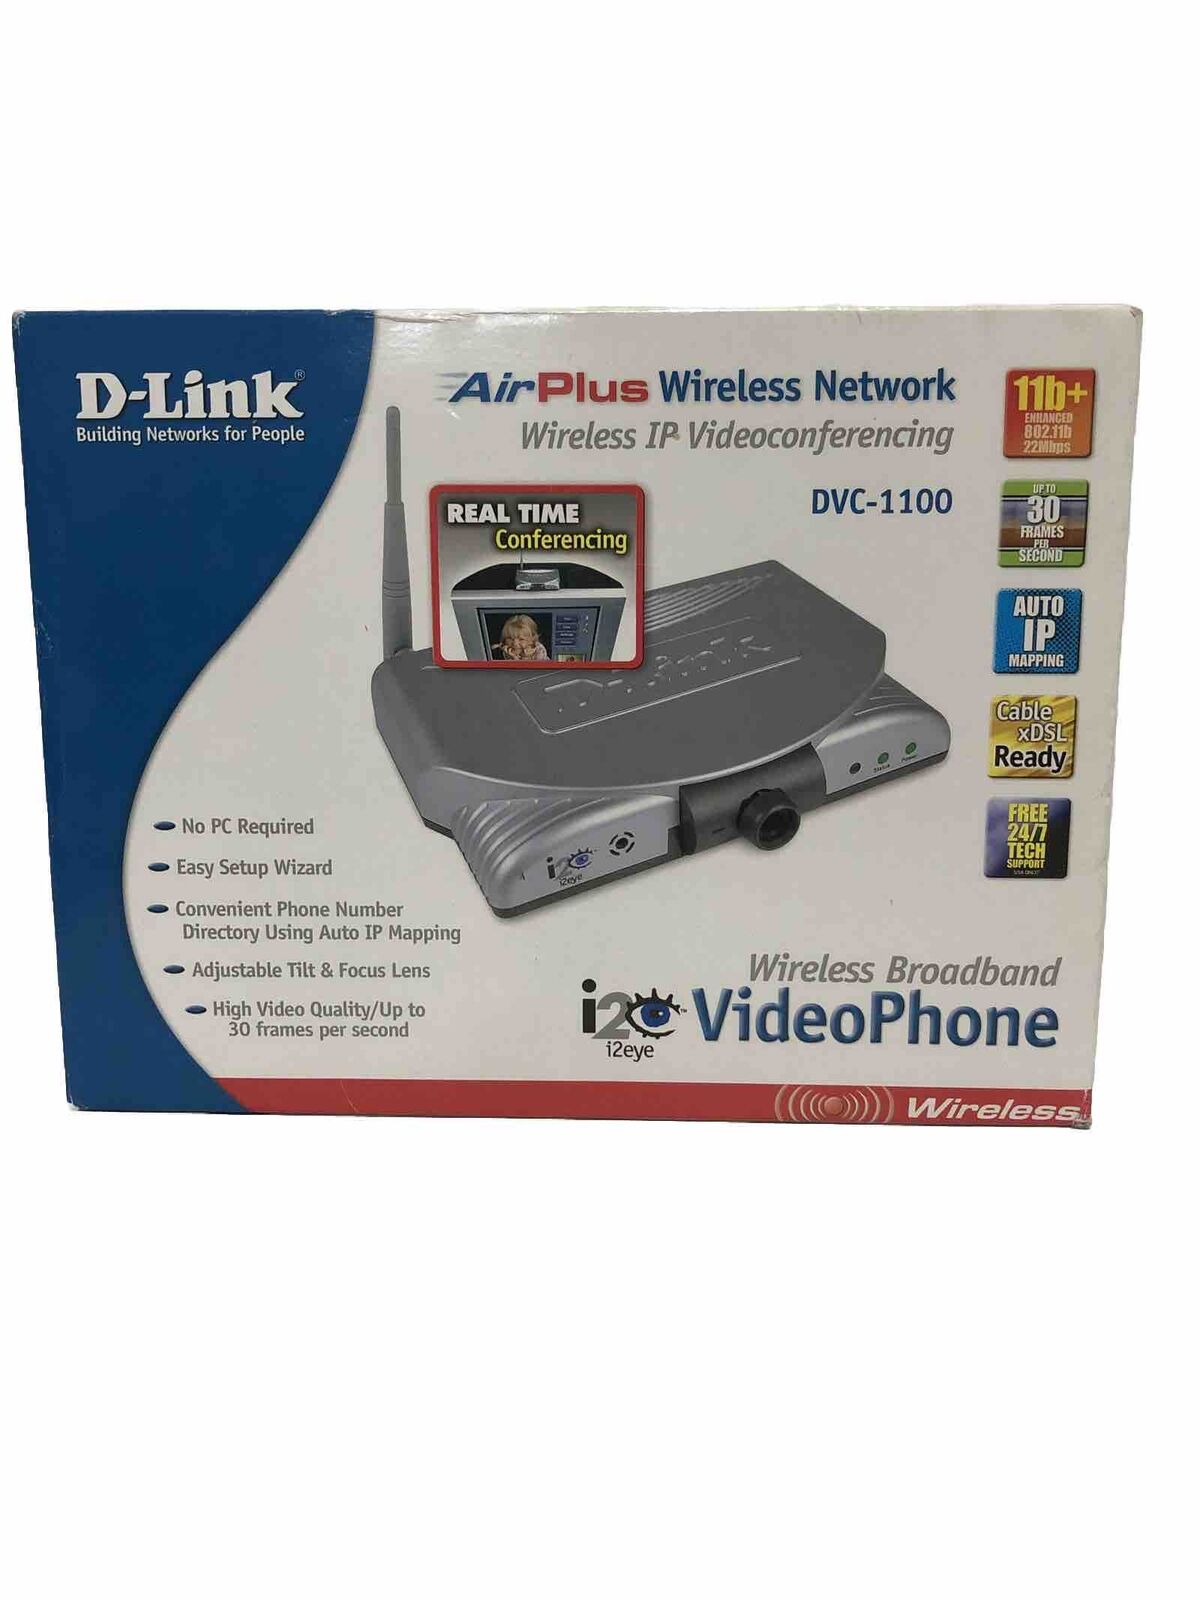 New D-Link DVC-1100 AirPlus Wireless Network IP Videoconferencing READ